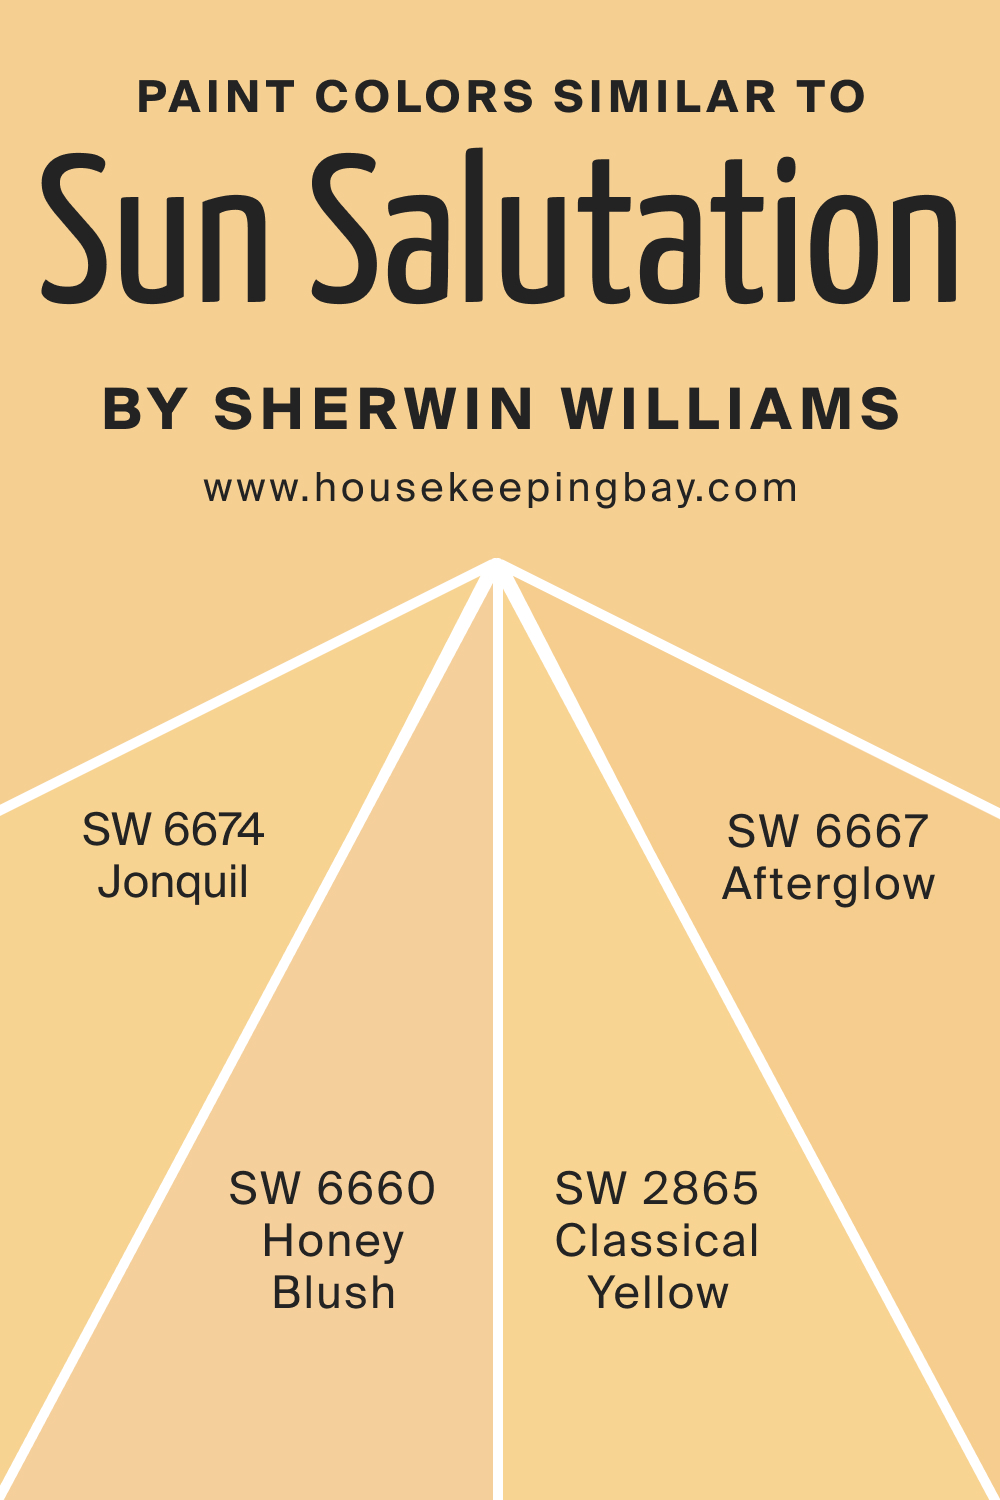 Paint Color Similar to Sun Salutation SW 9664 by Sherwin Williams